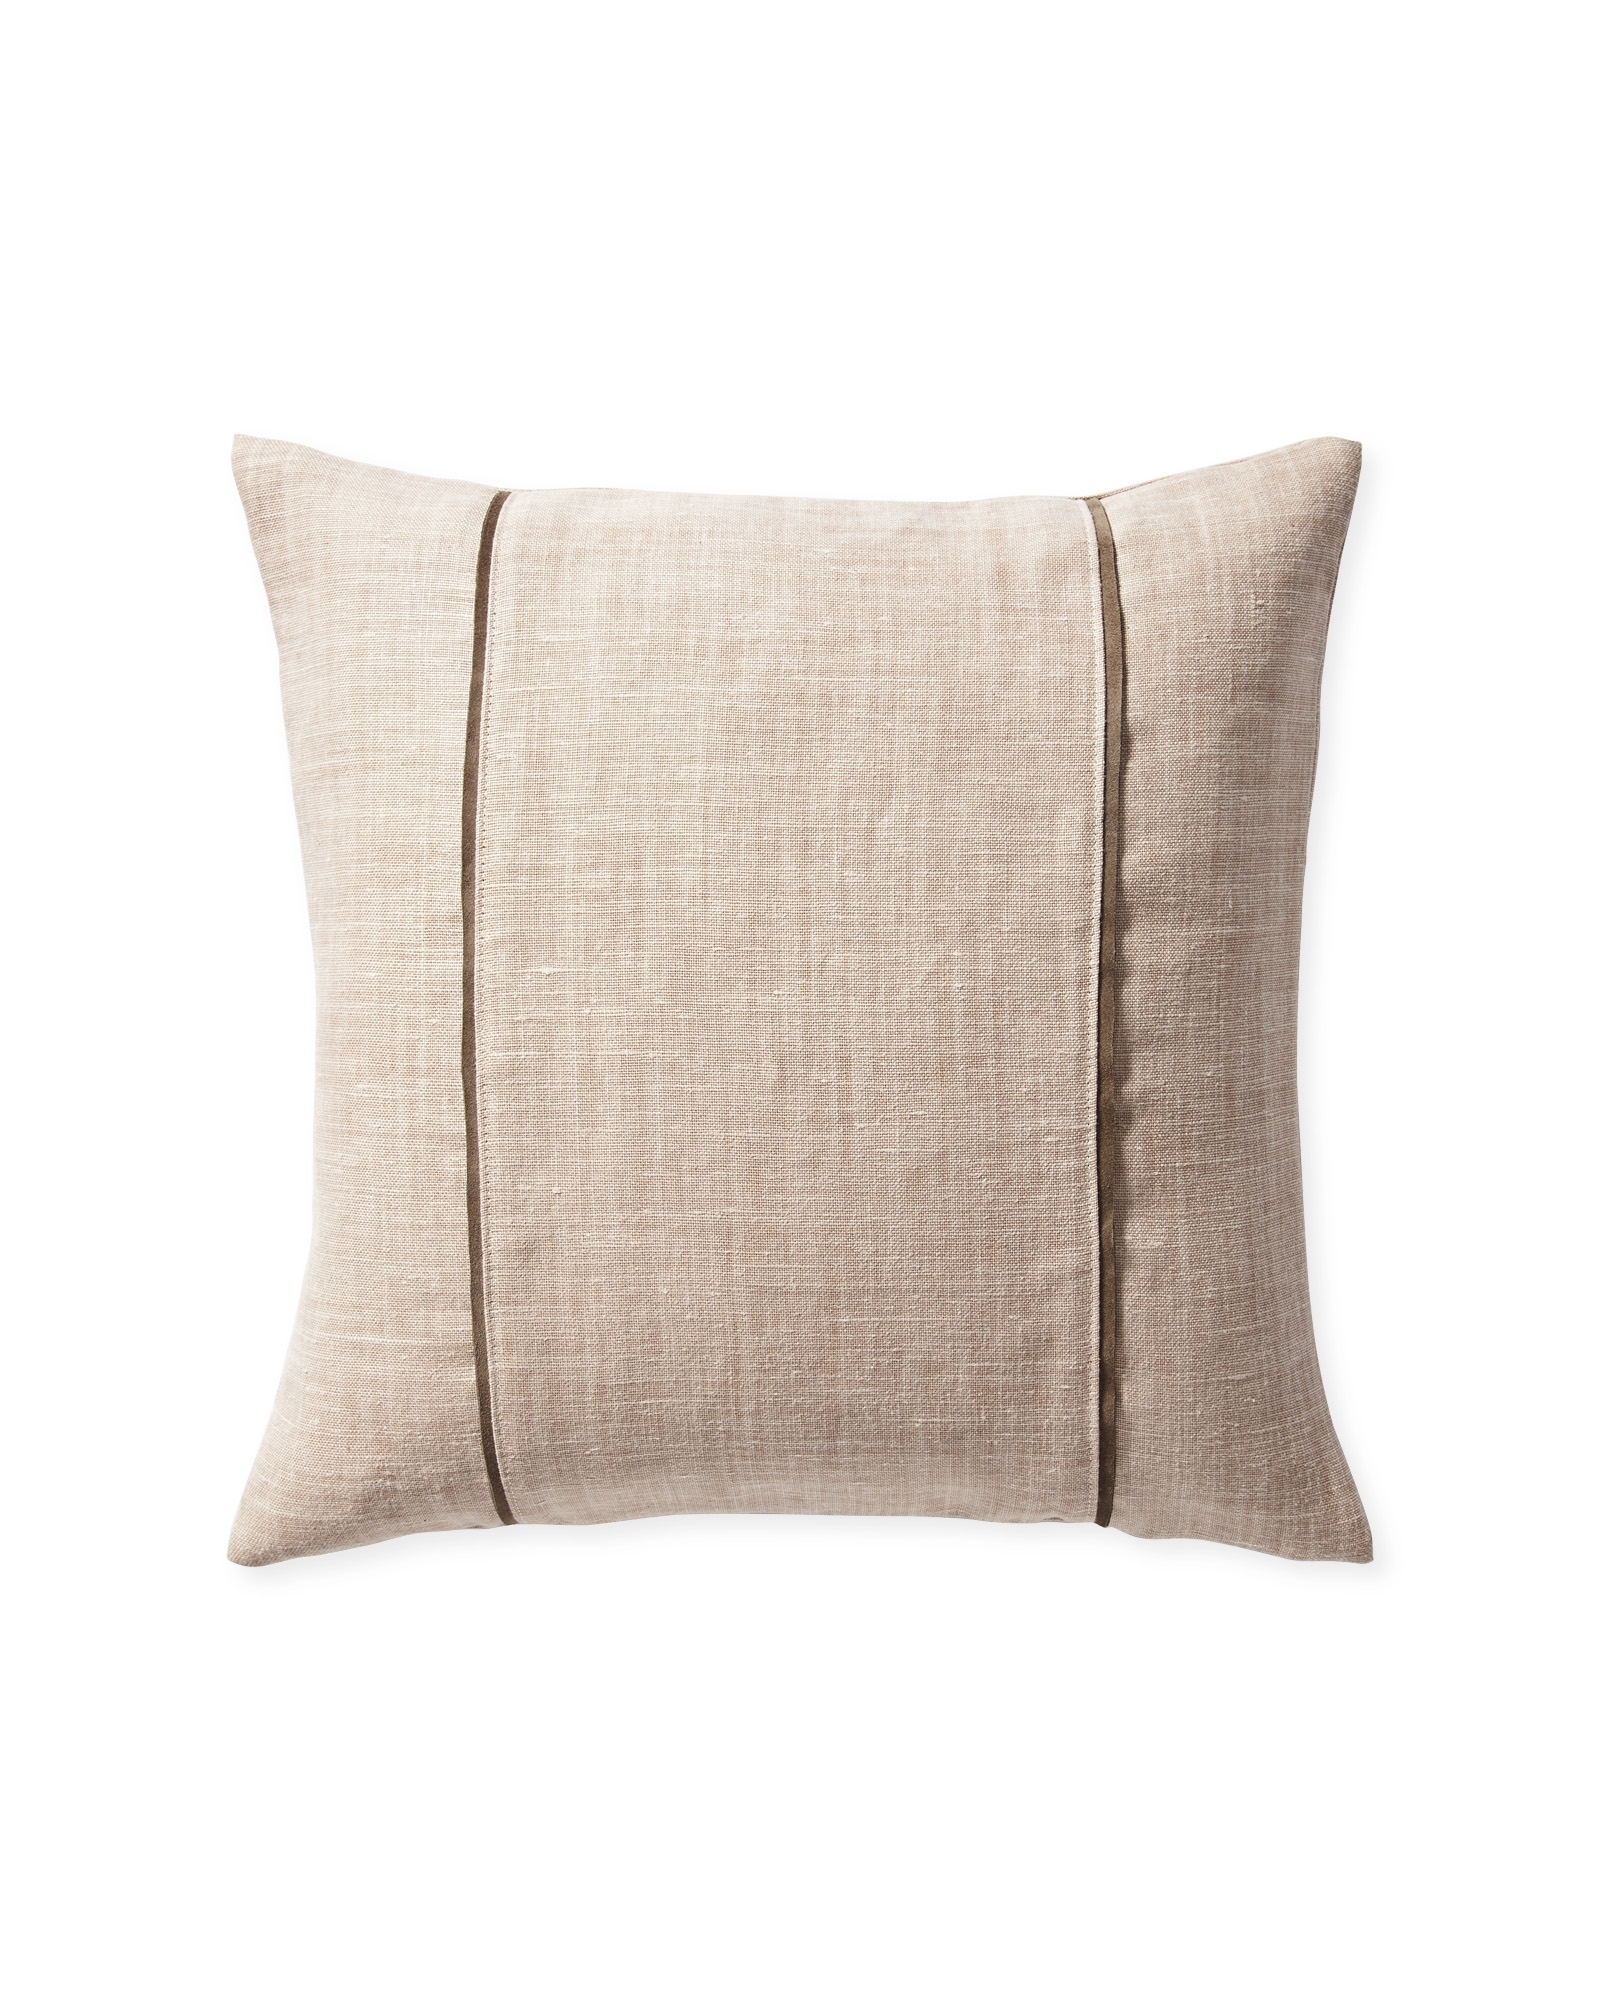 Kentfield 20" SQ Pillow Cover - Pink Sand - Insert sold separately - Image 0